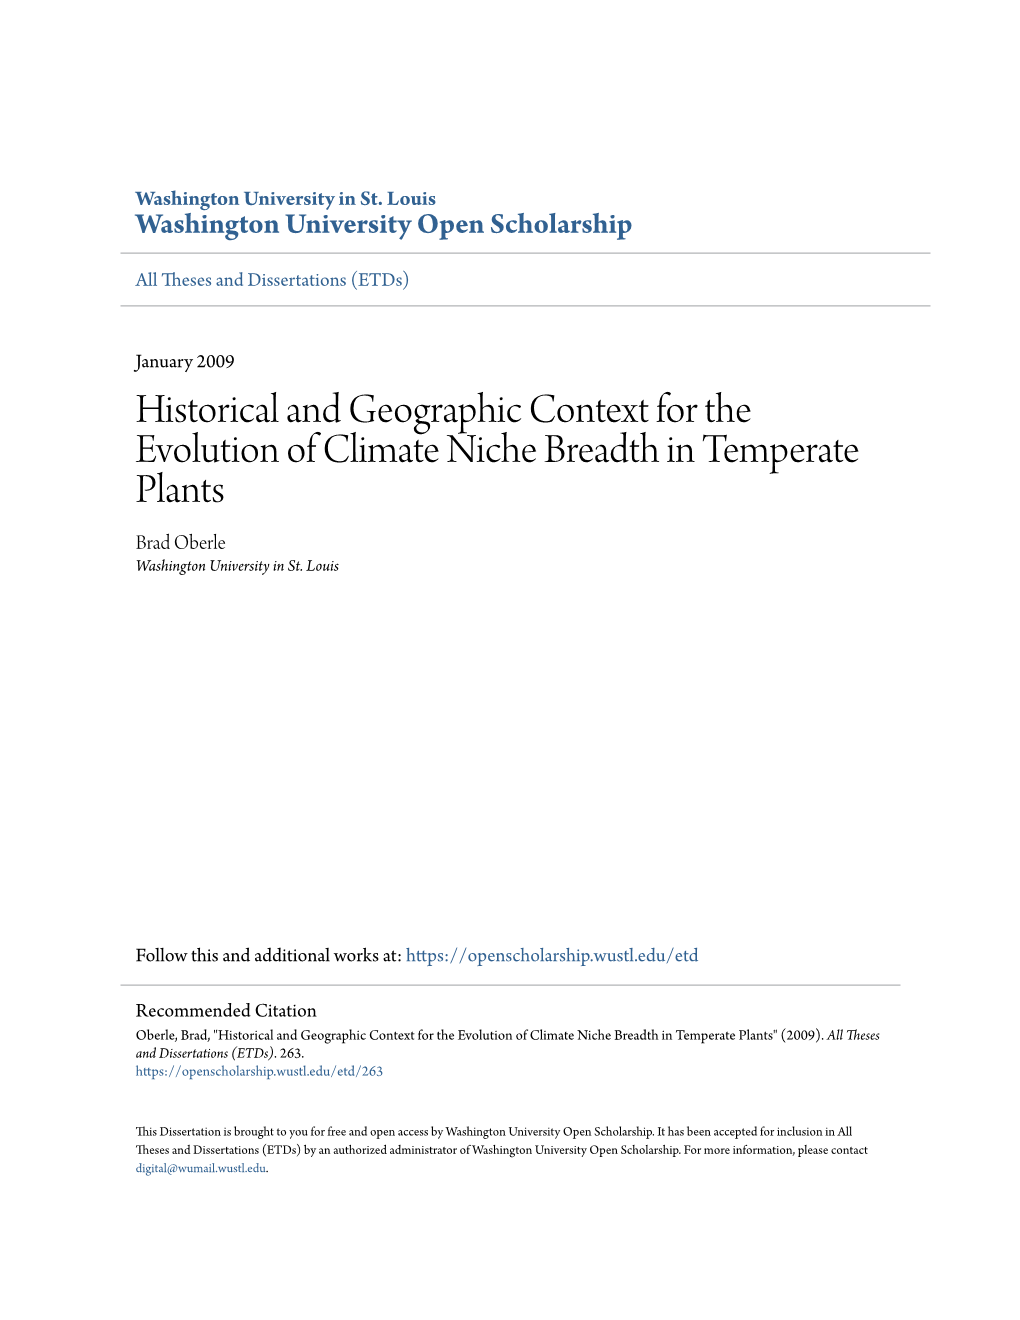 Historical and Geographic Context for the Evolution of Climate Niche Breadth in Temperate Plants Brad Oberle Washington University in St